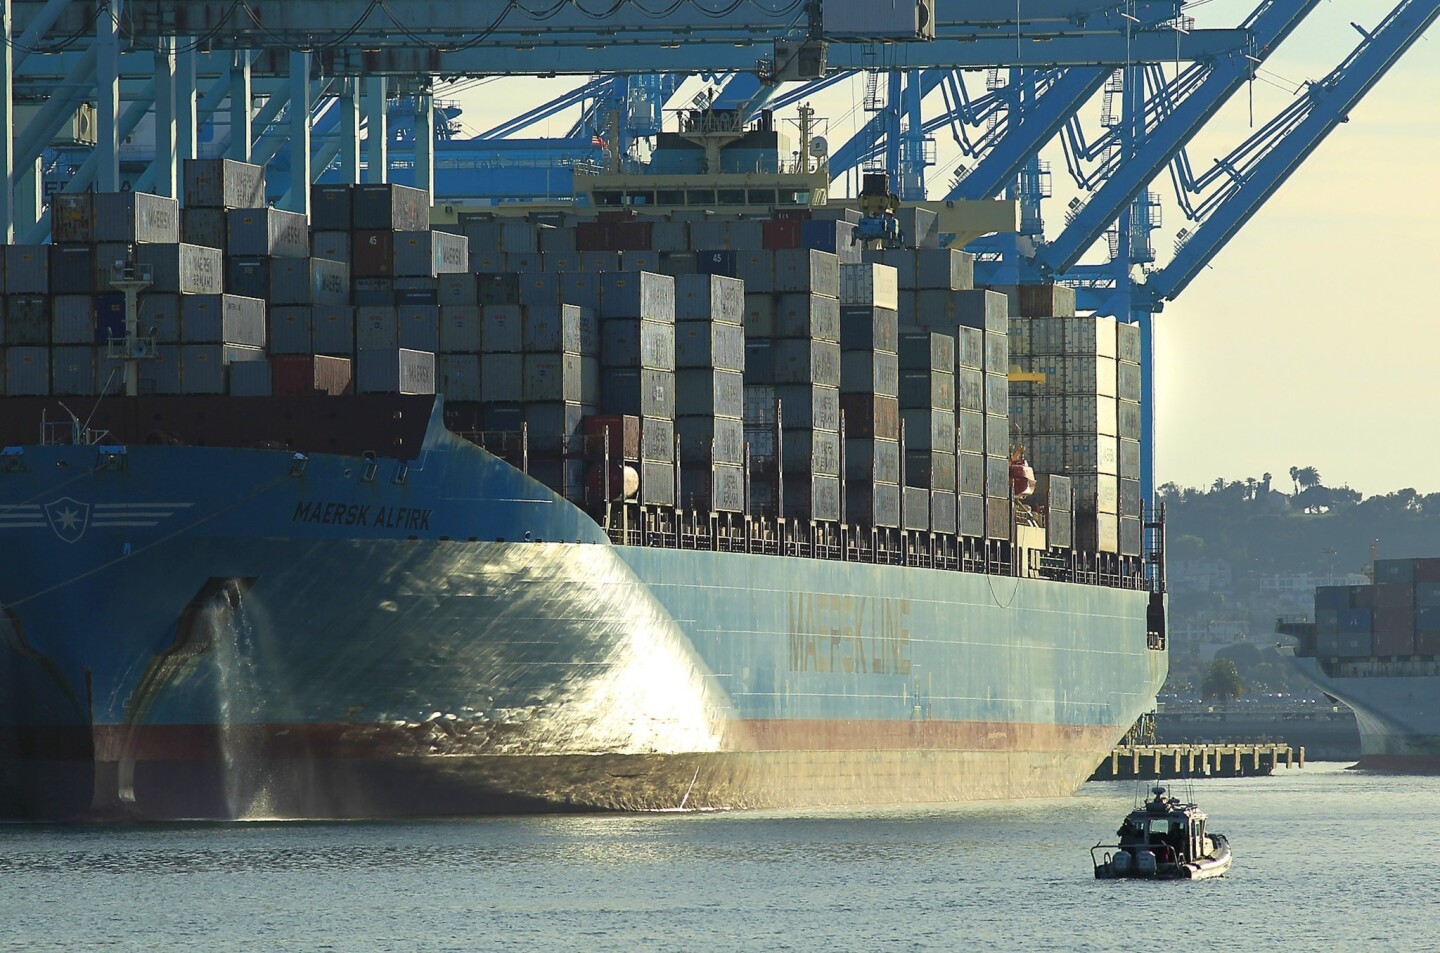 A container ship is docked in the Port of Los Angeles on Terminal Island.